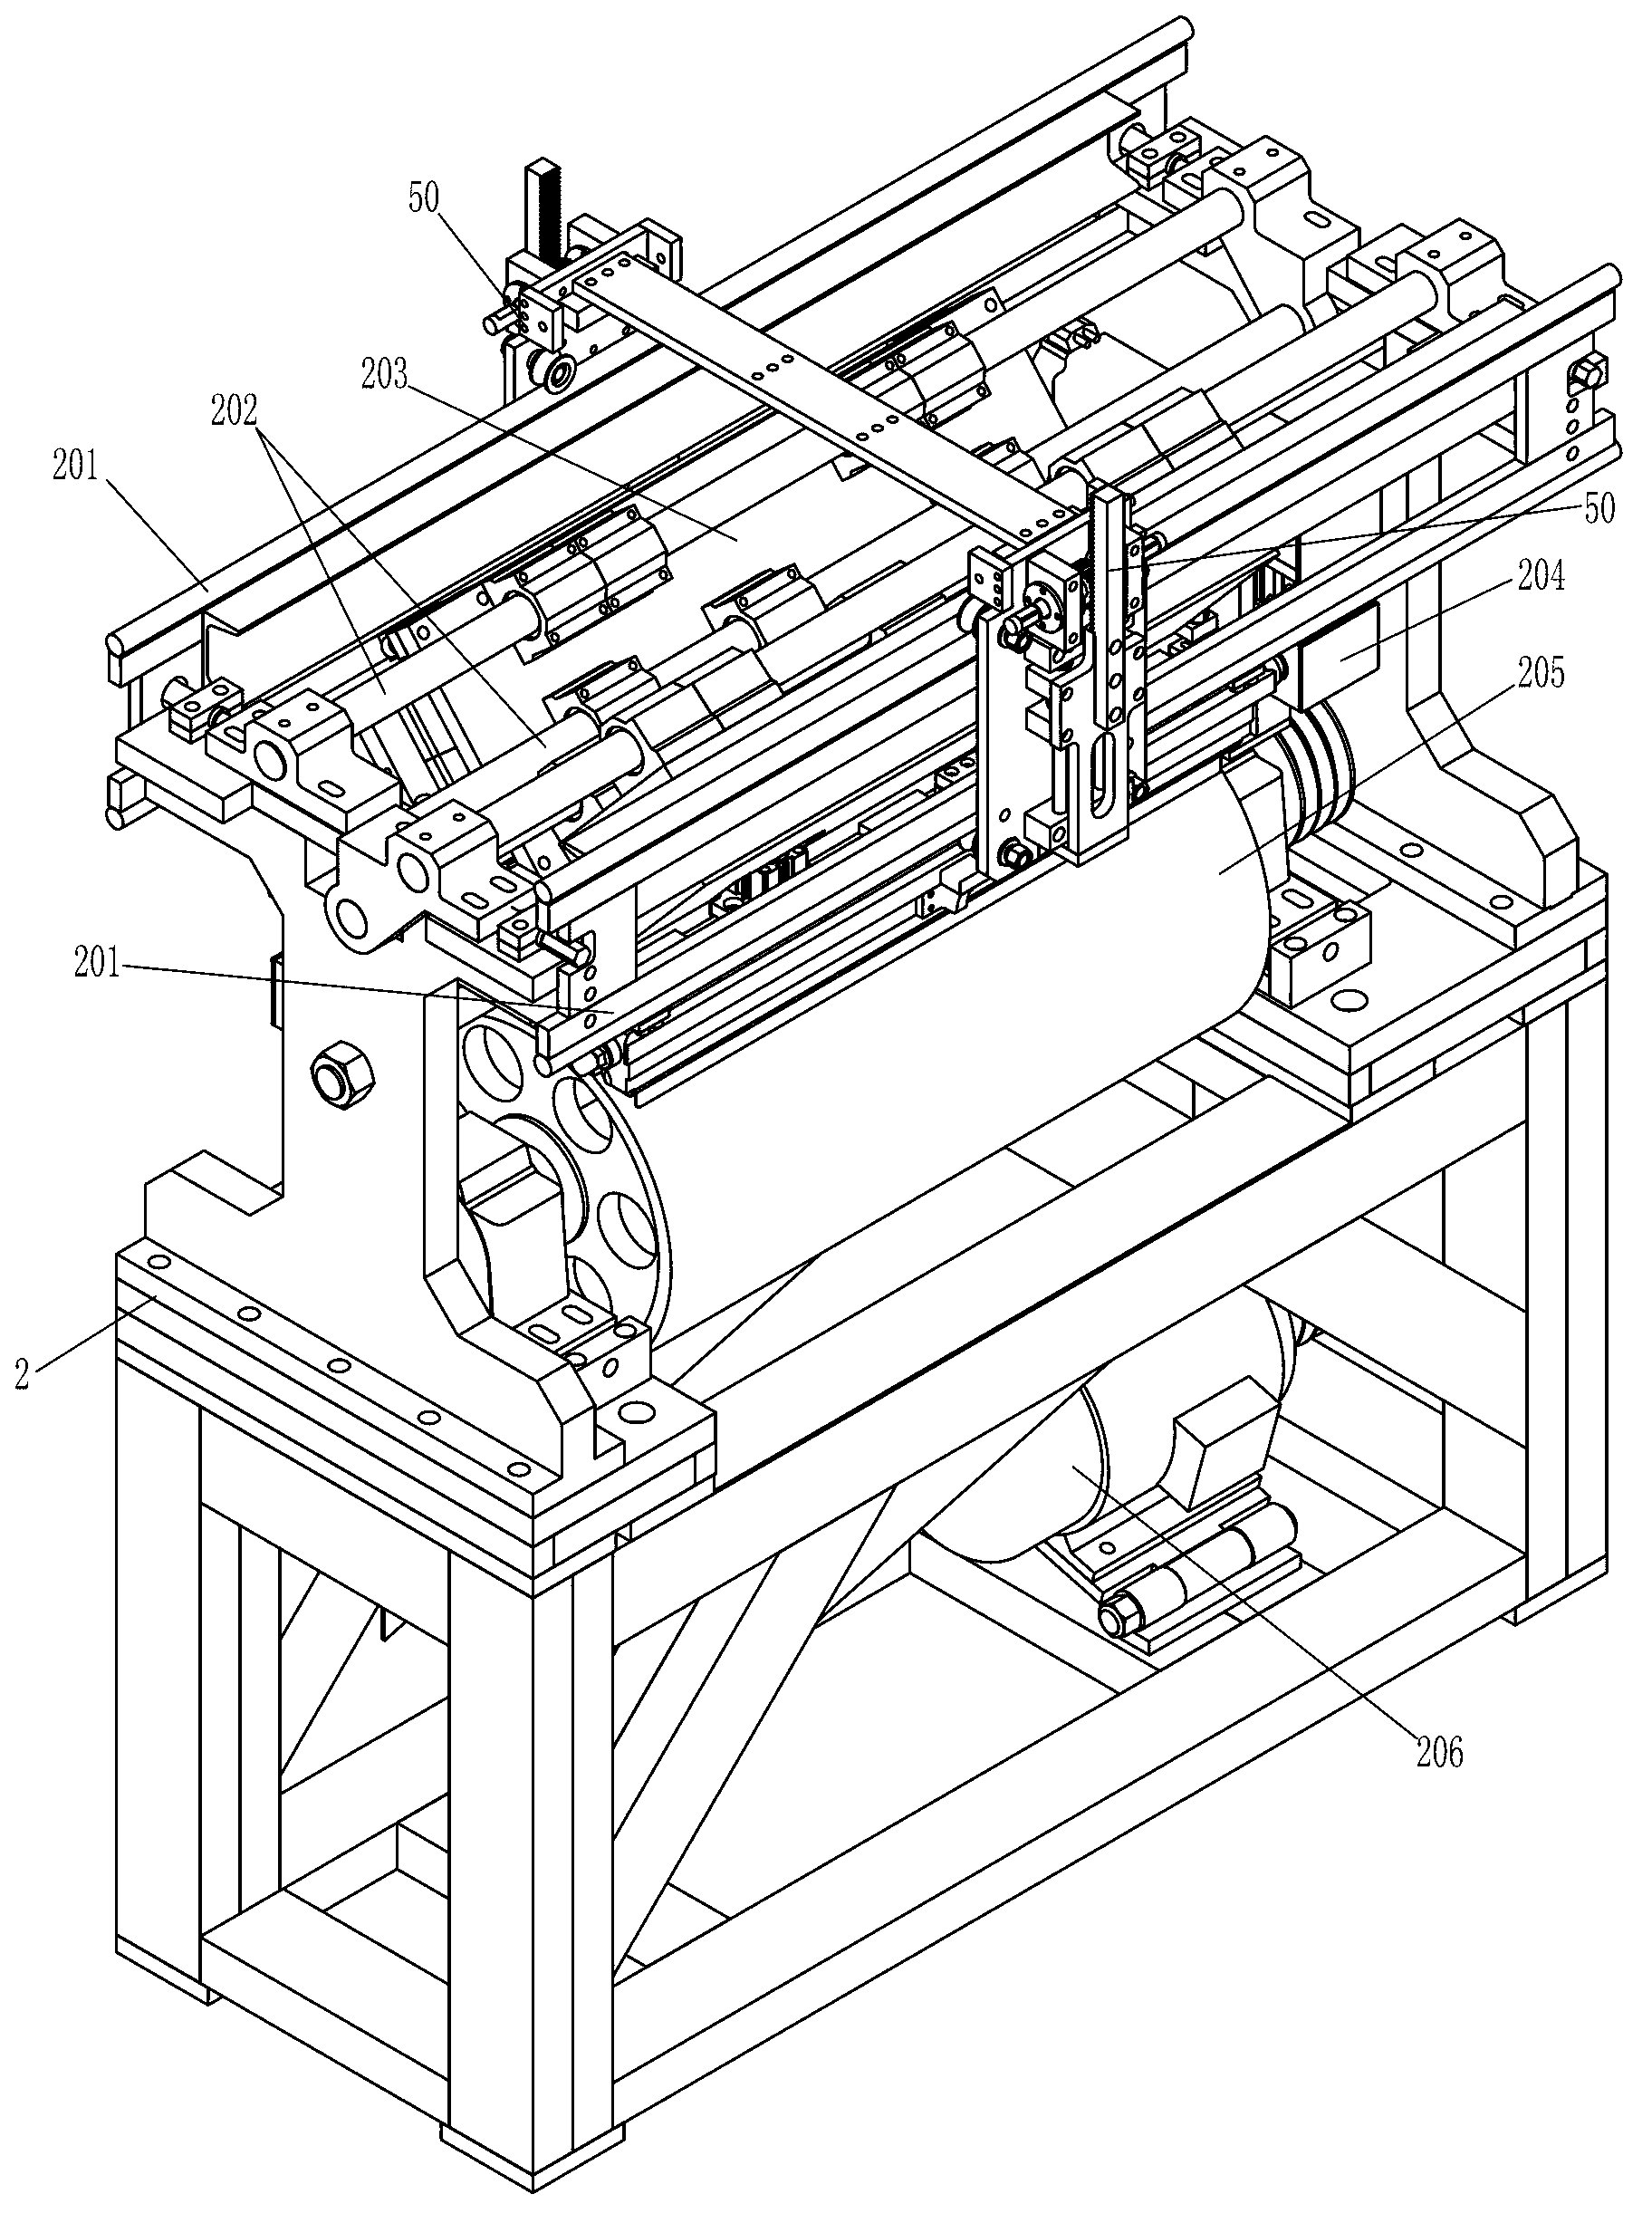 Automatic grinding and polishing system for crystal blanks